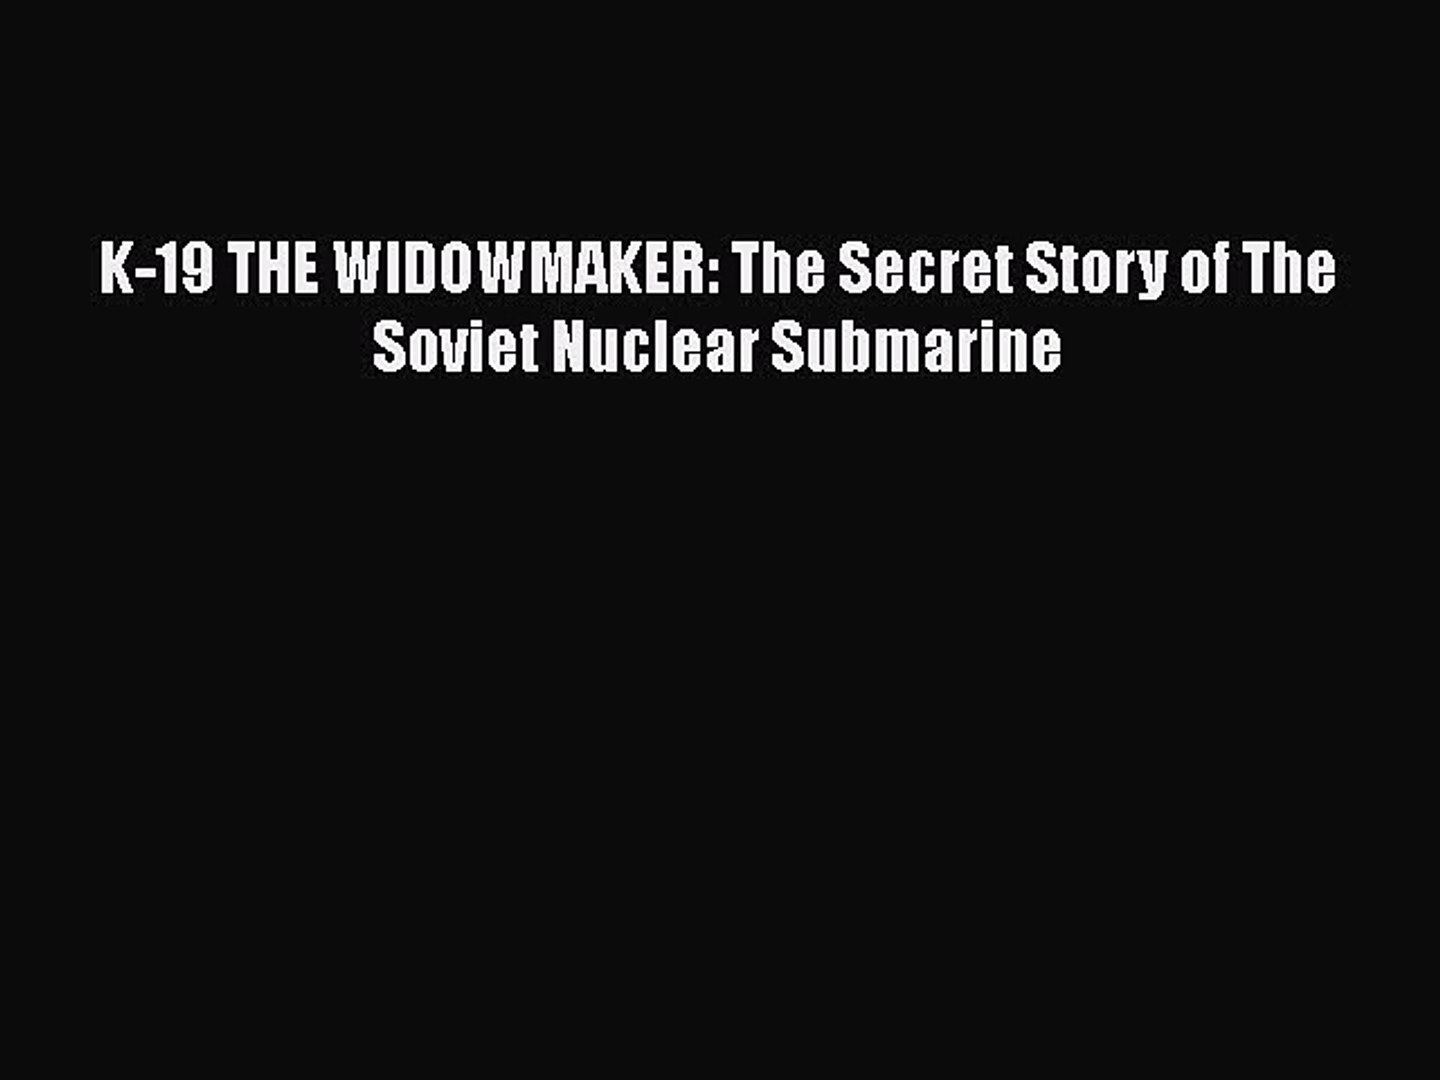 K-19 THE WIDOWMAKER The Secret Story of The Soviet Nuclear Submarine 